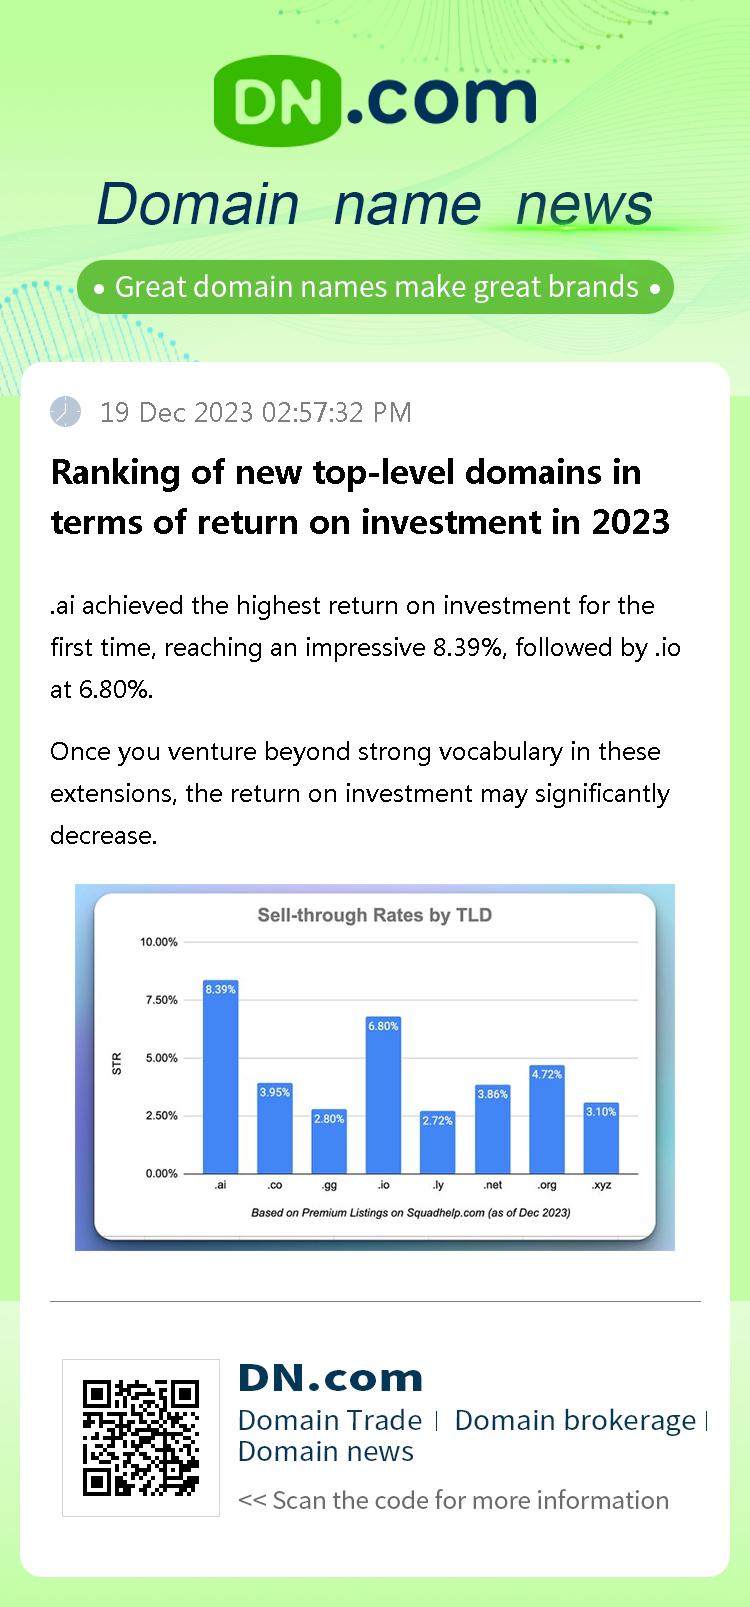 Ranking of new top-level domains in terms of return on investment in 2023